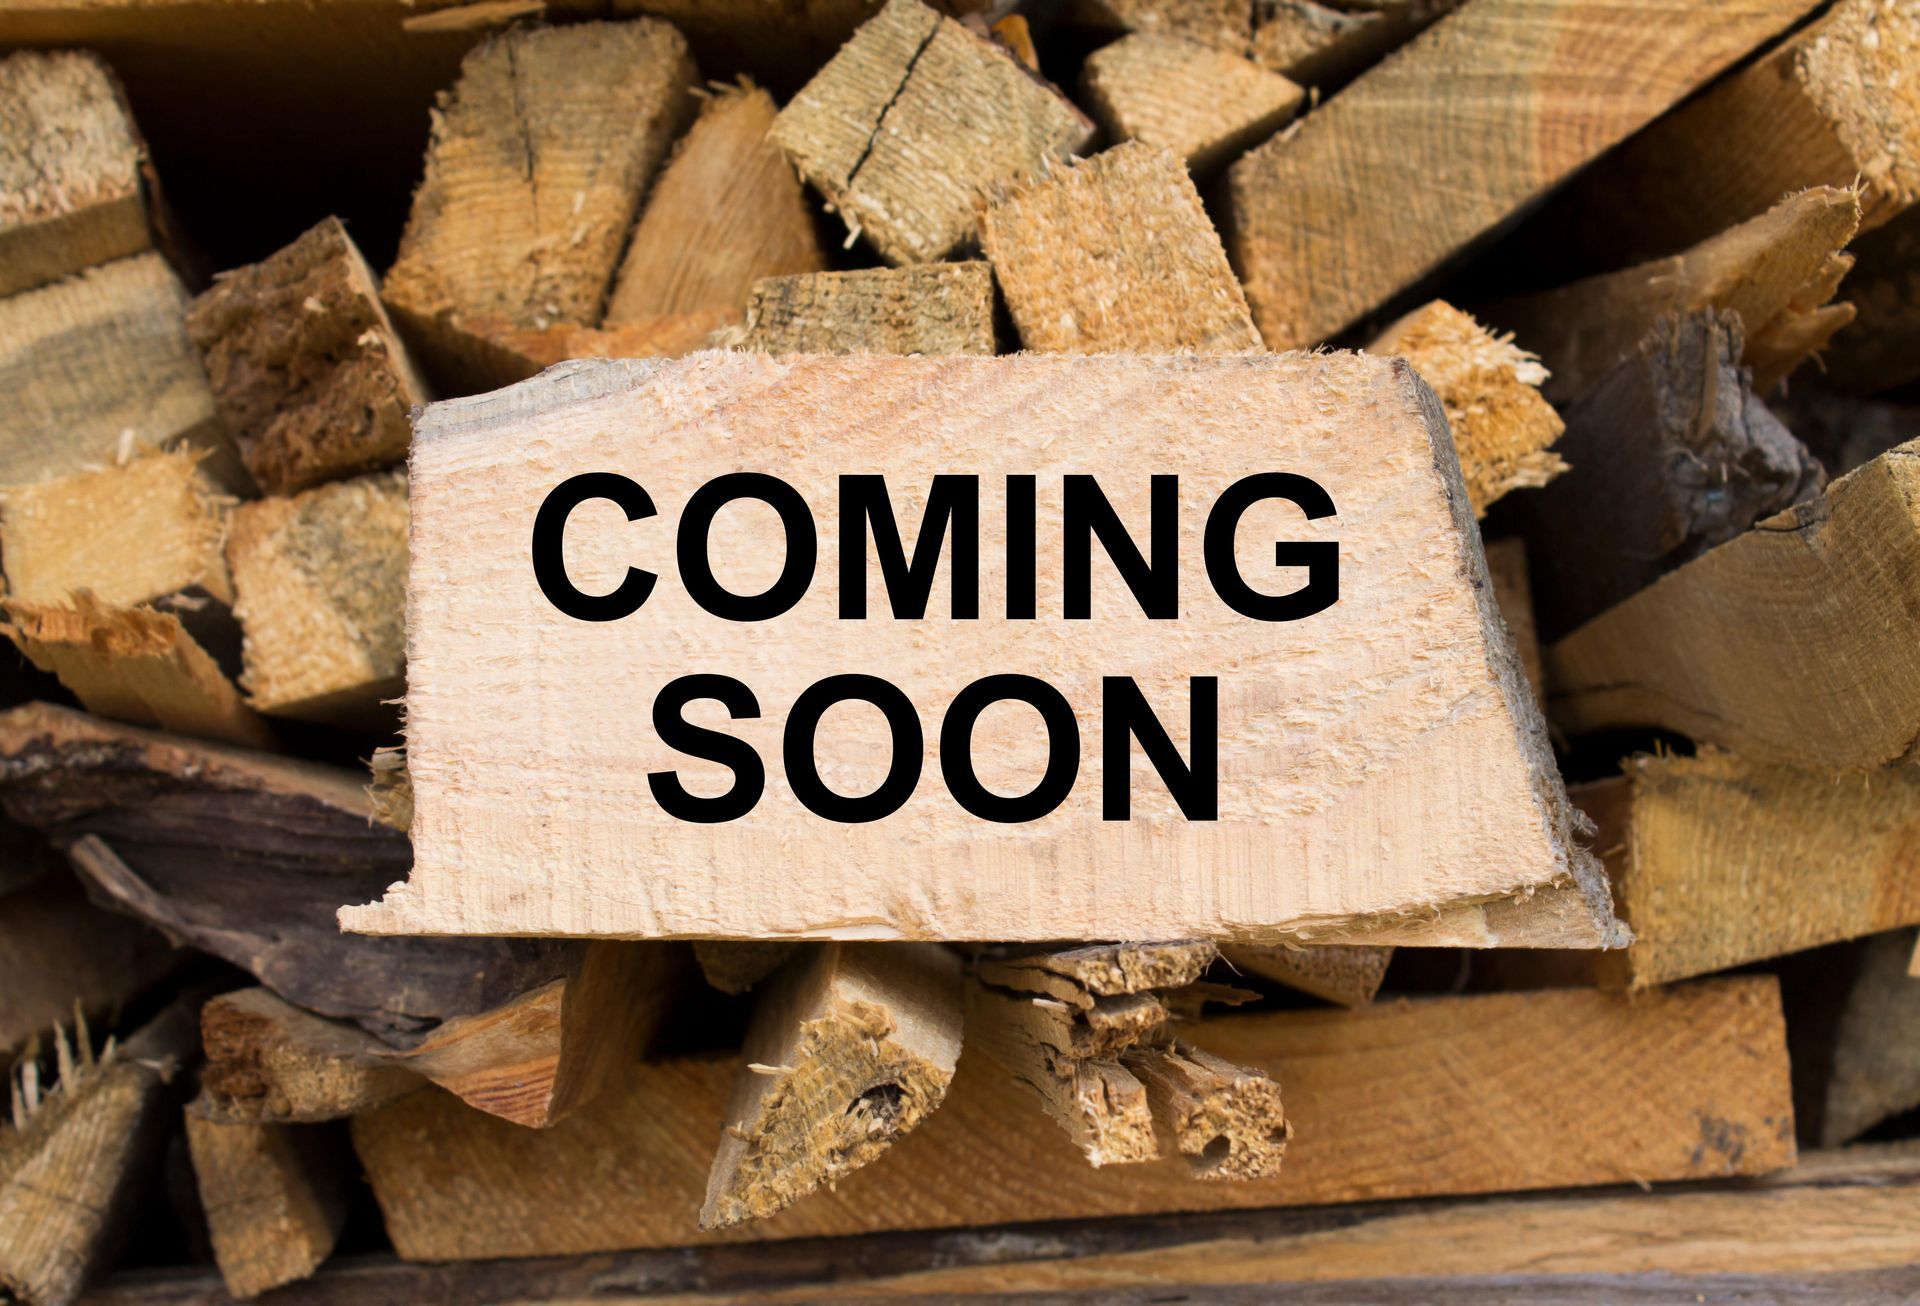 A wooden sign that says `` coming soon '' is sitting on top of a pile of wood.